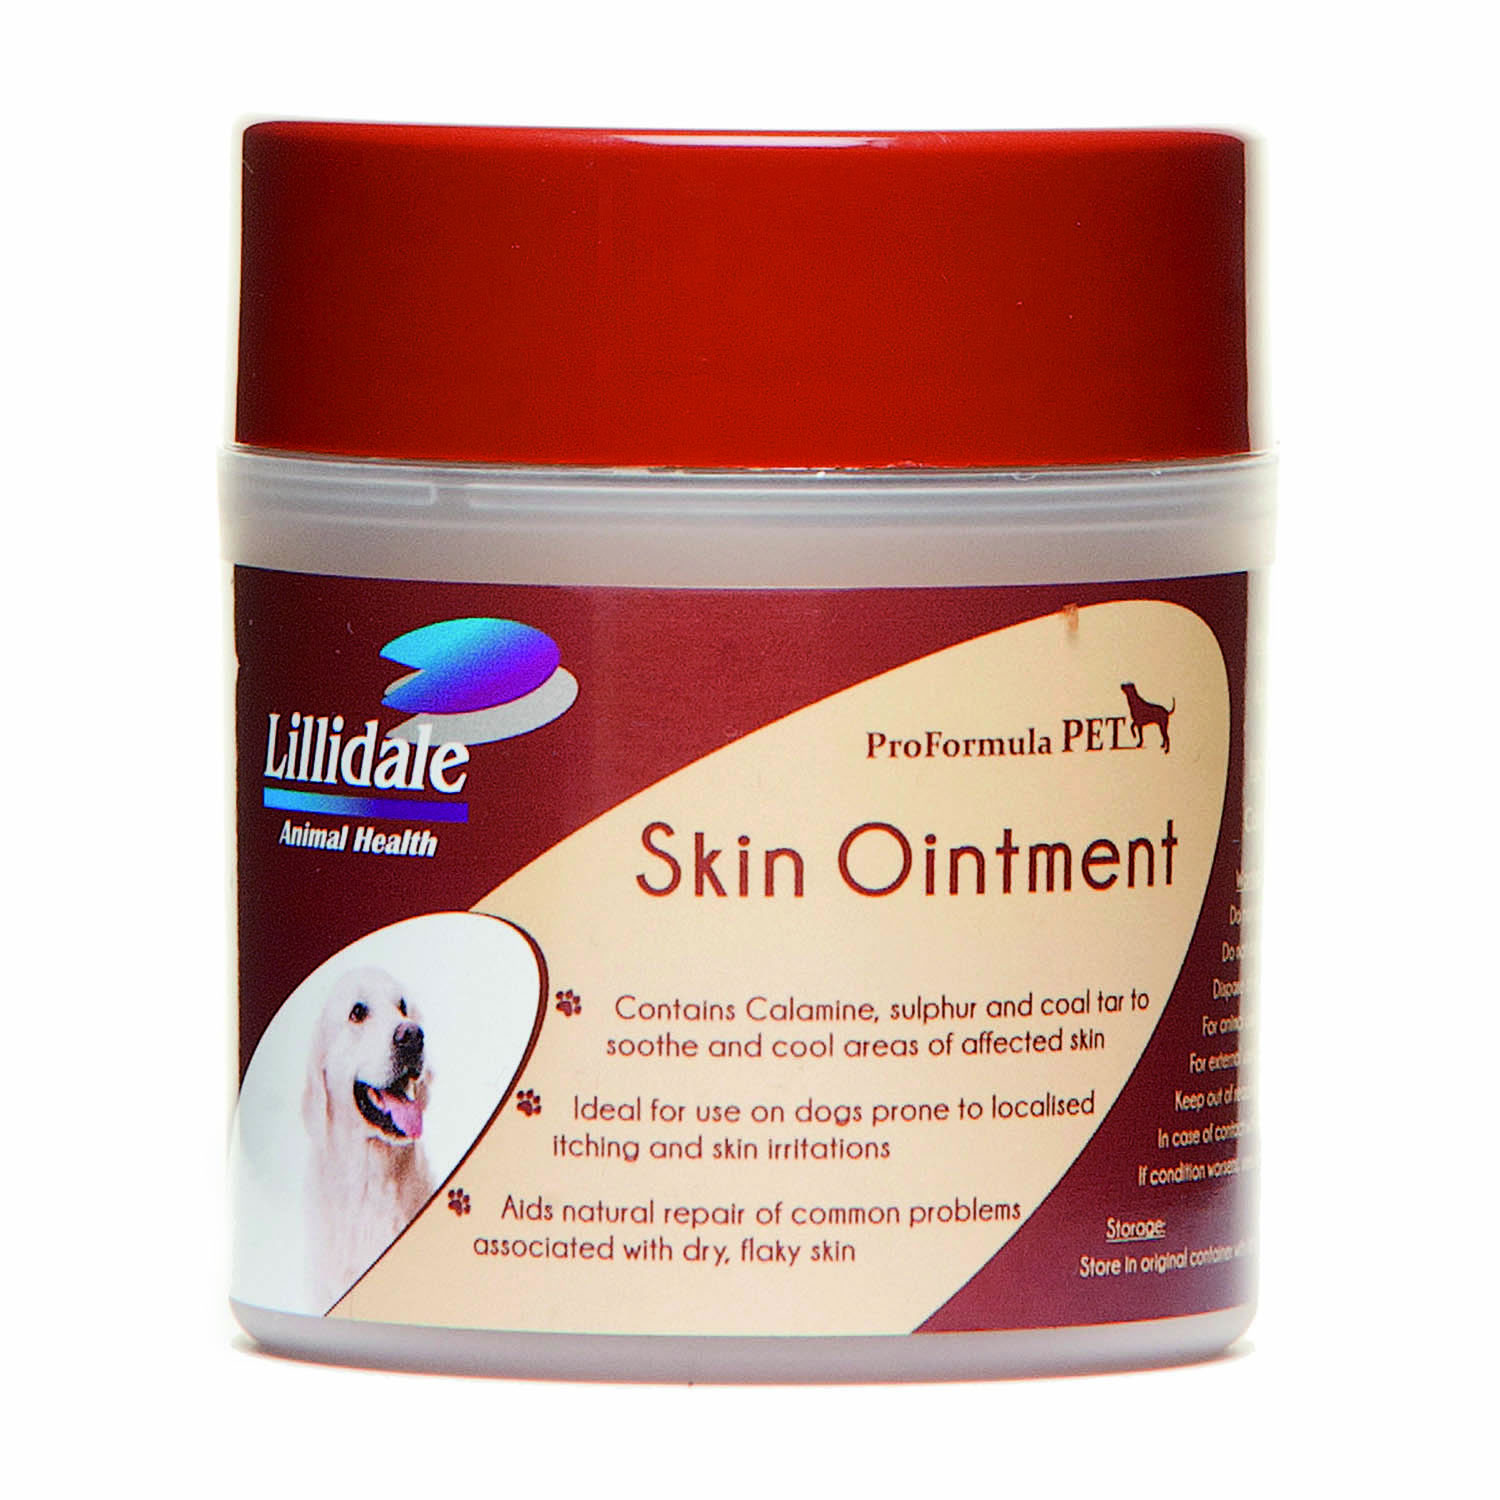 LILLIDALE SKIN OINTMENT 4 DOGS 125 GM 125 GM